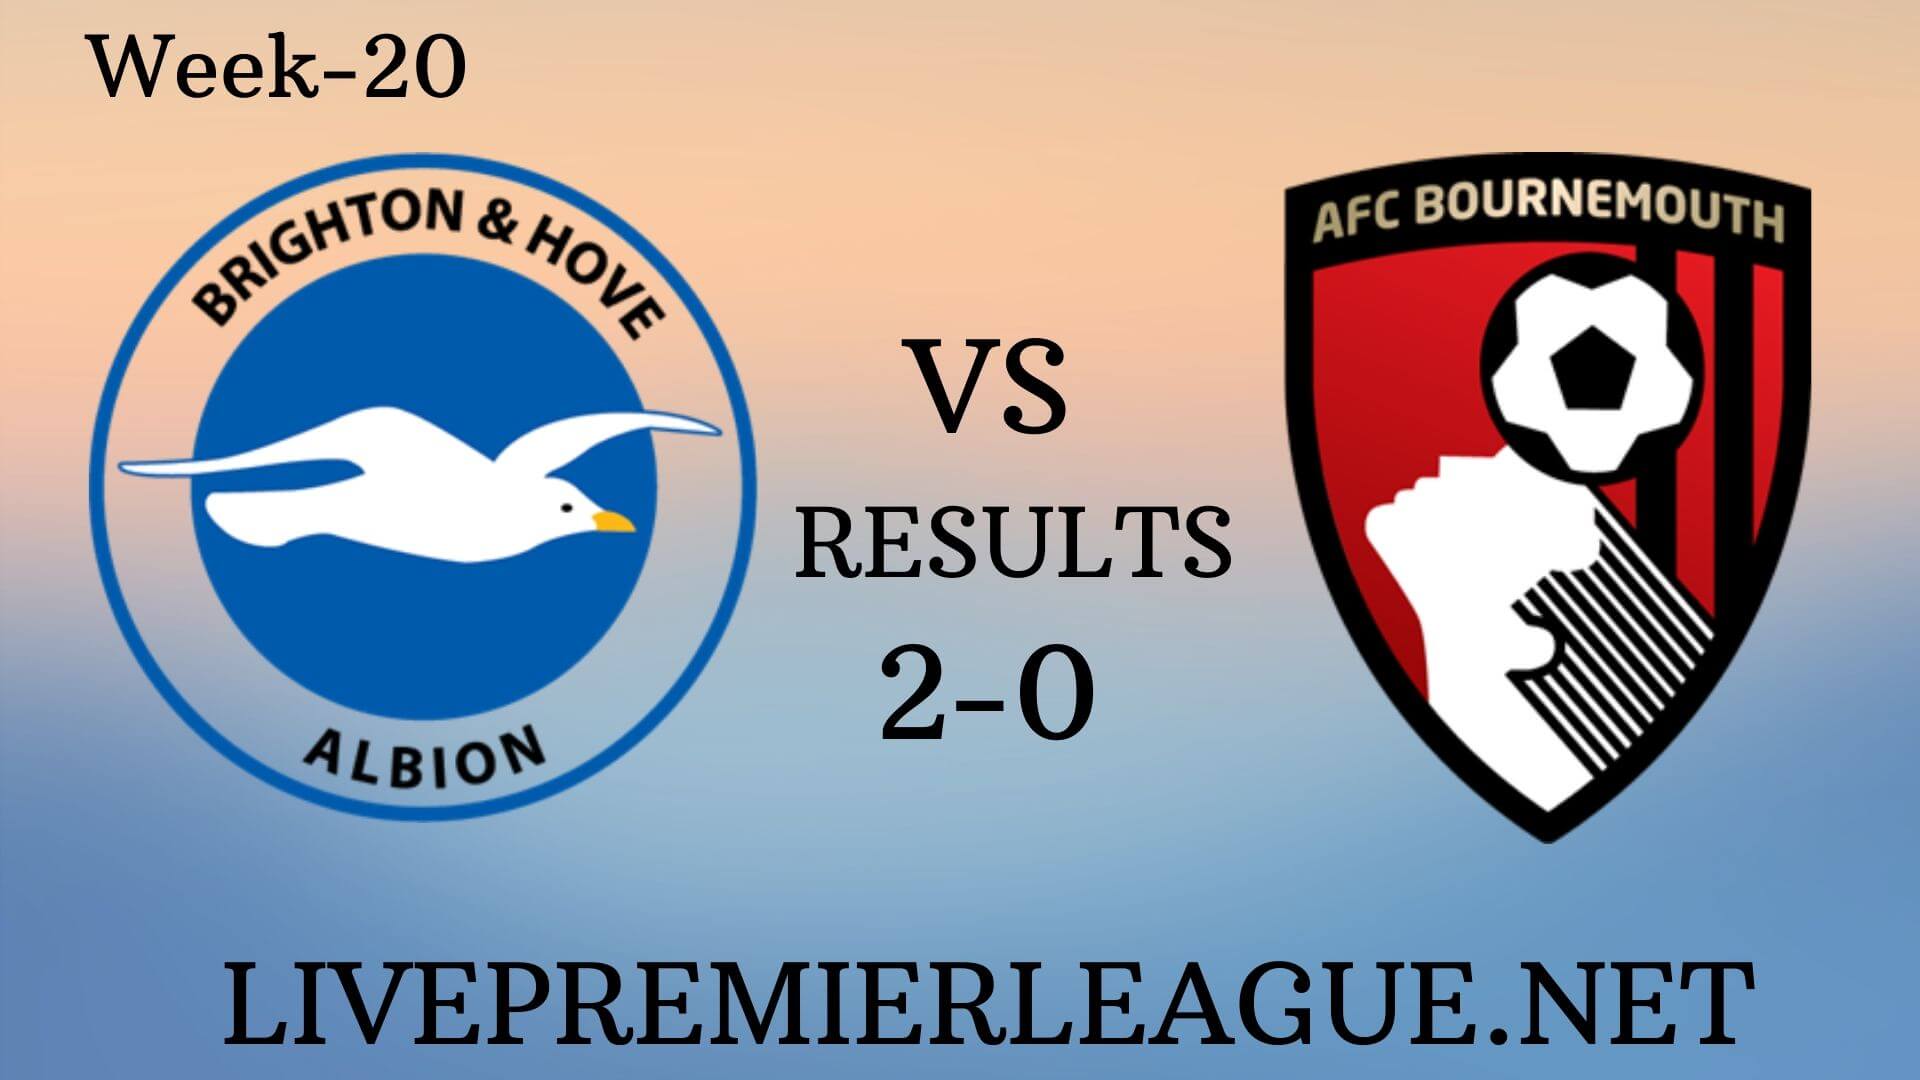 Brighton and Hove Albion Vs AFC Bournemouth | Week 20 Results 2019